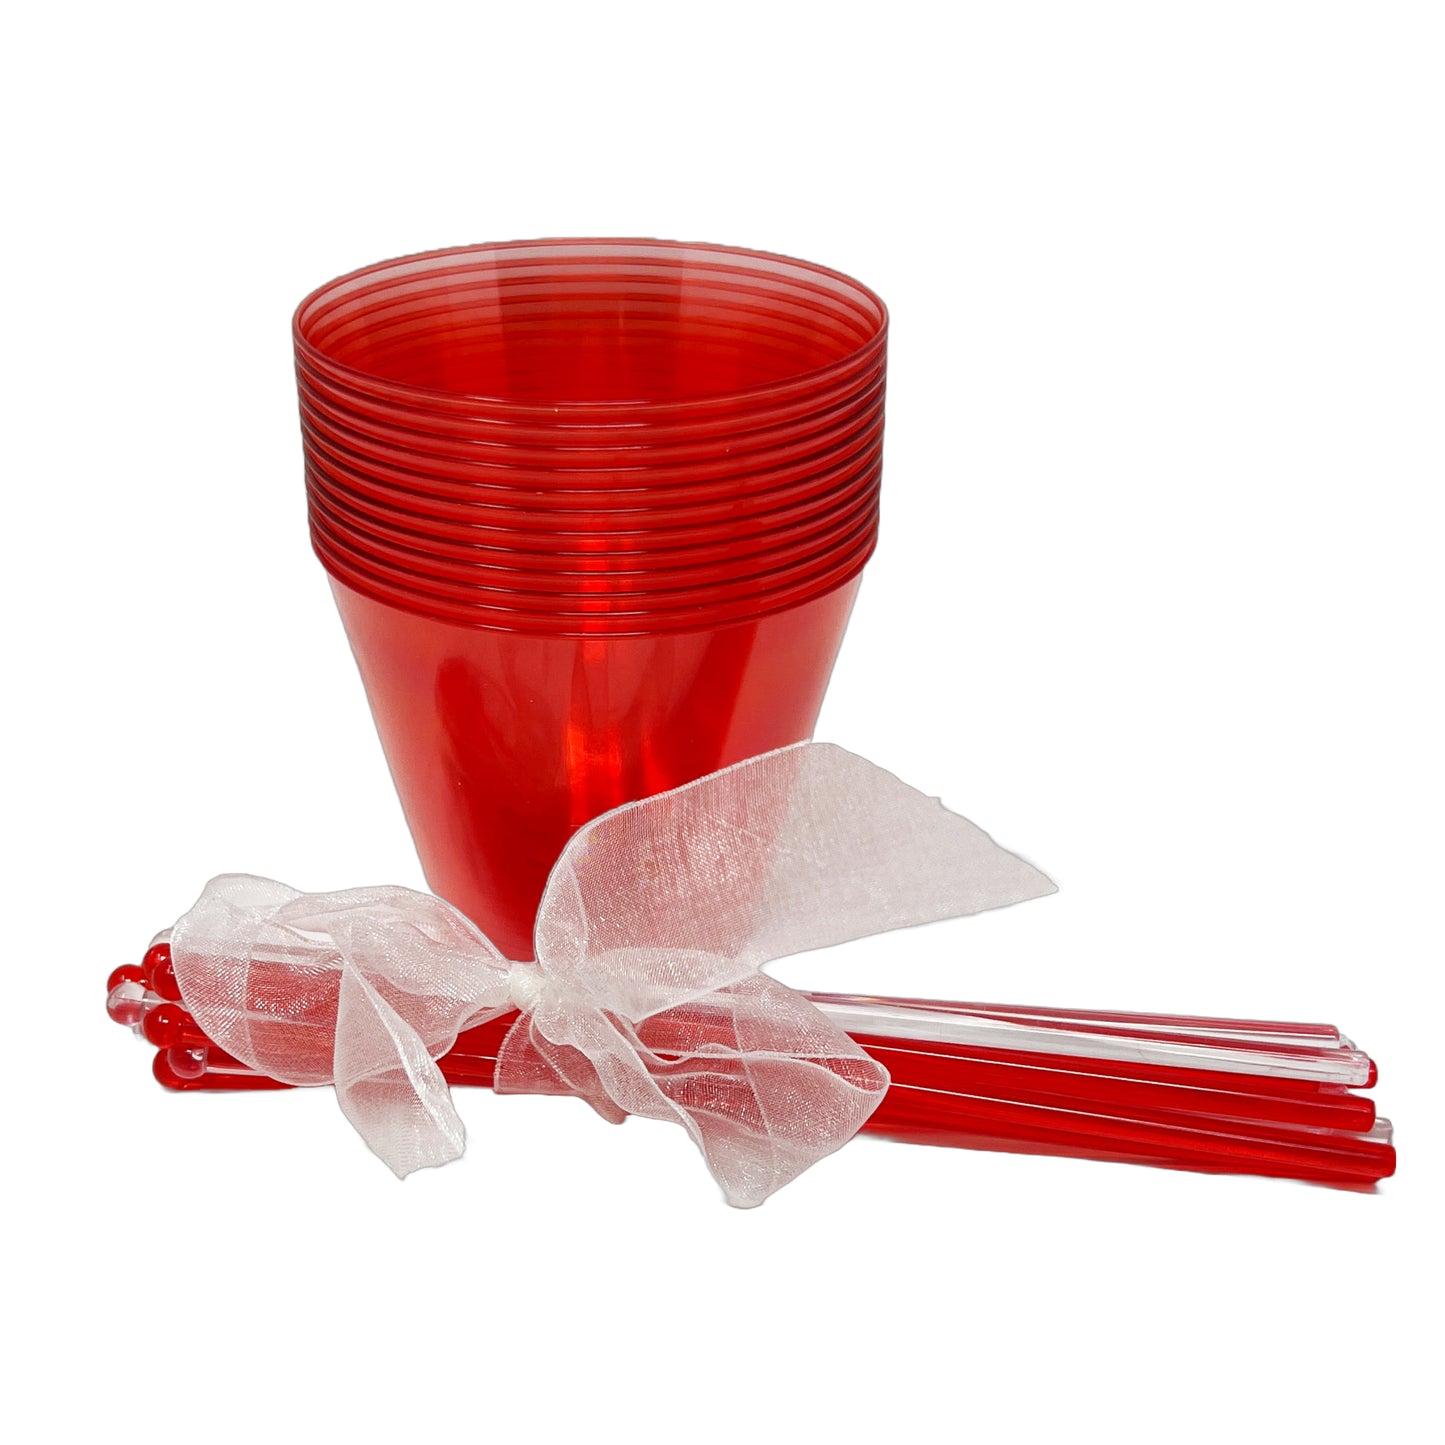 Santa Drink Dispenser and Cocktail Set with Drink Stirrers and Table Cover